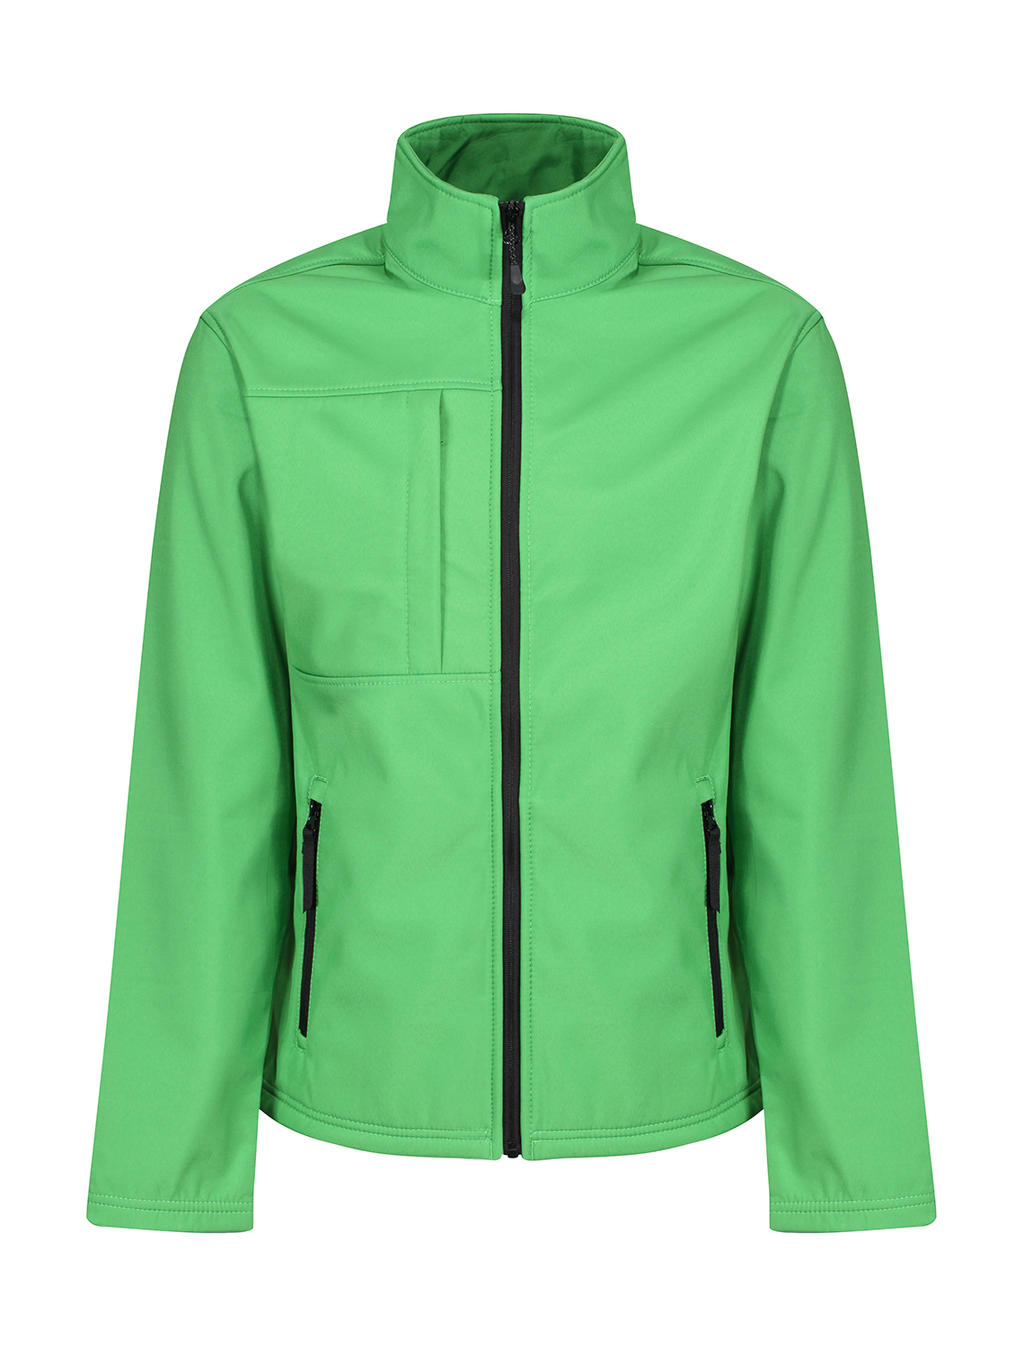  Octagon II Softshell in Farbe Extreme Green/Black